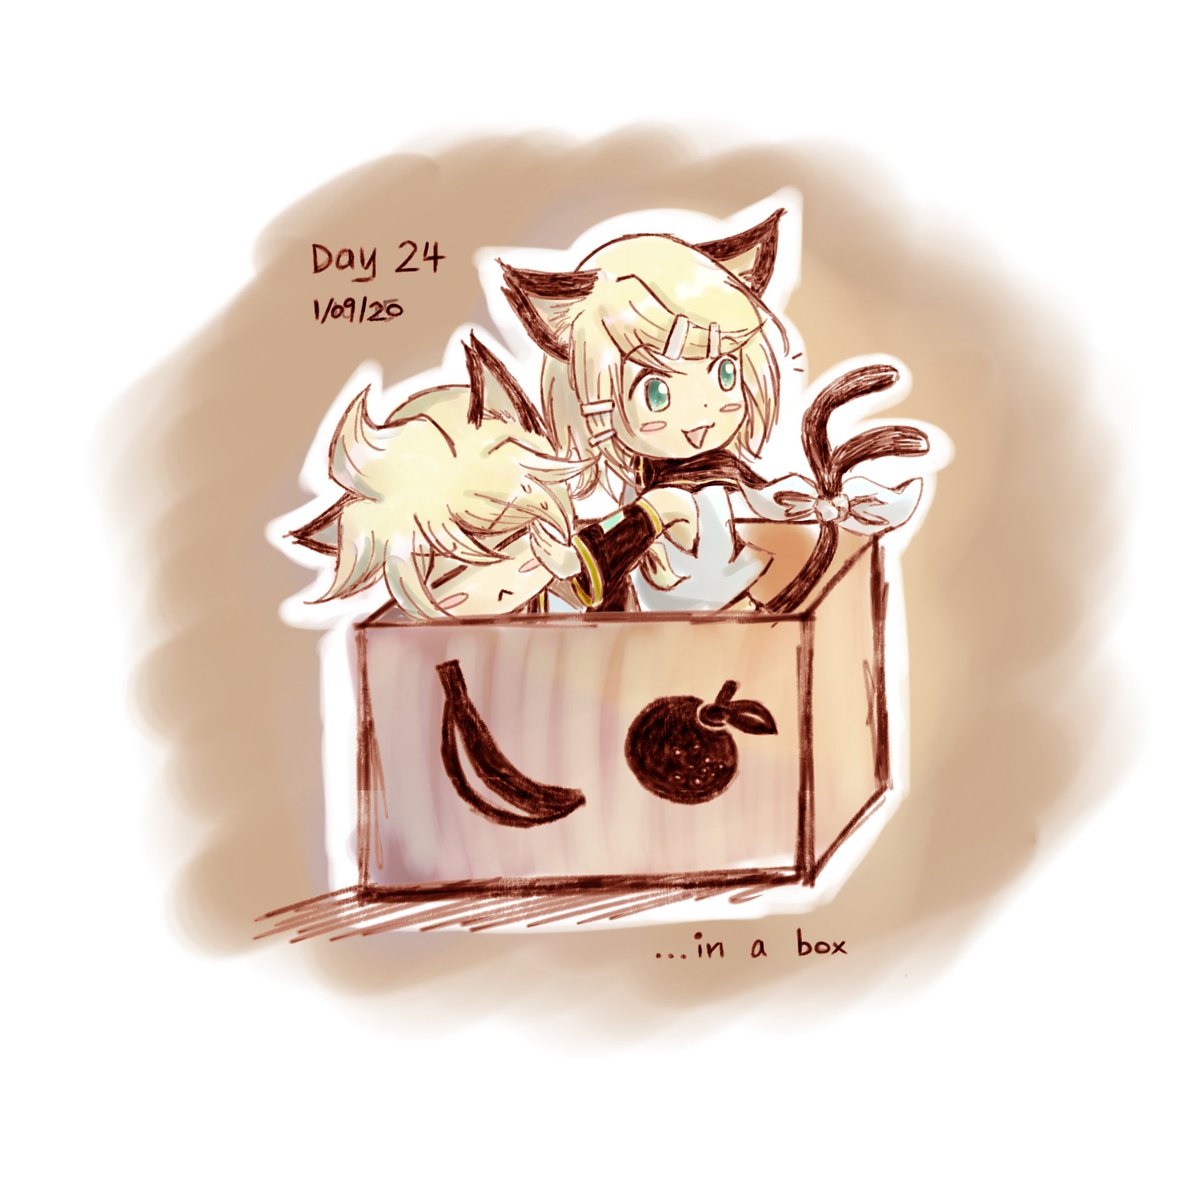 Day 24Rin and Len in a box #鏡音レン  #鏡音リン  #VOCALOID